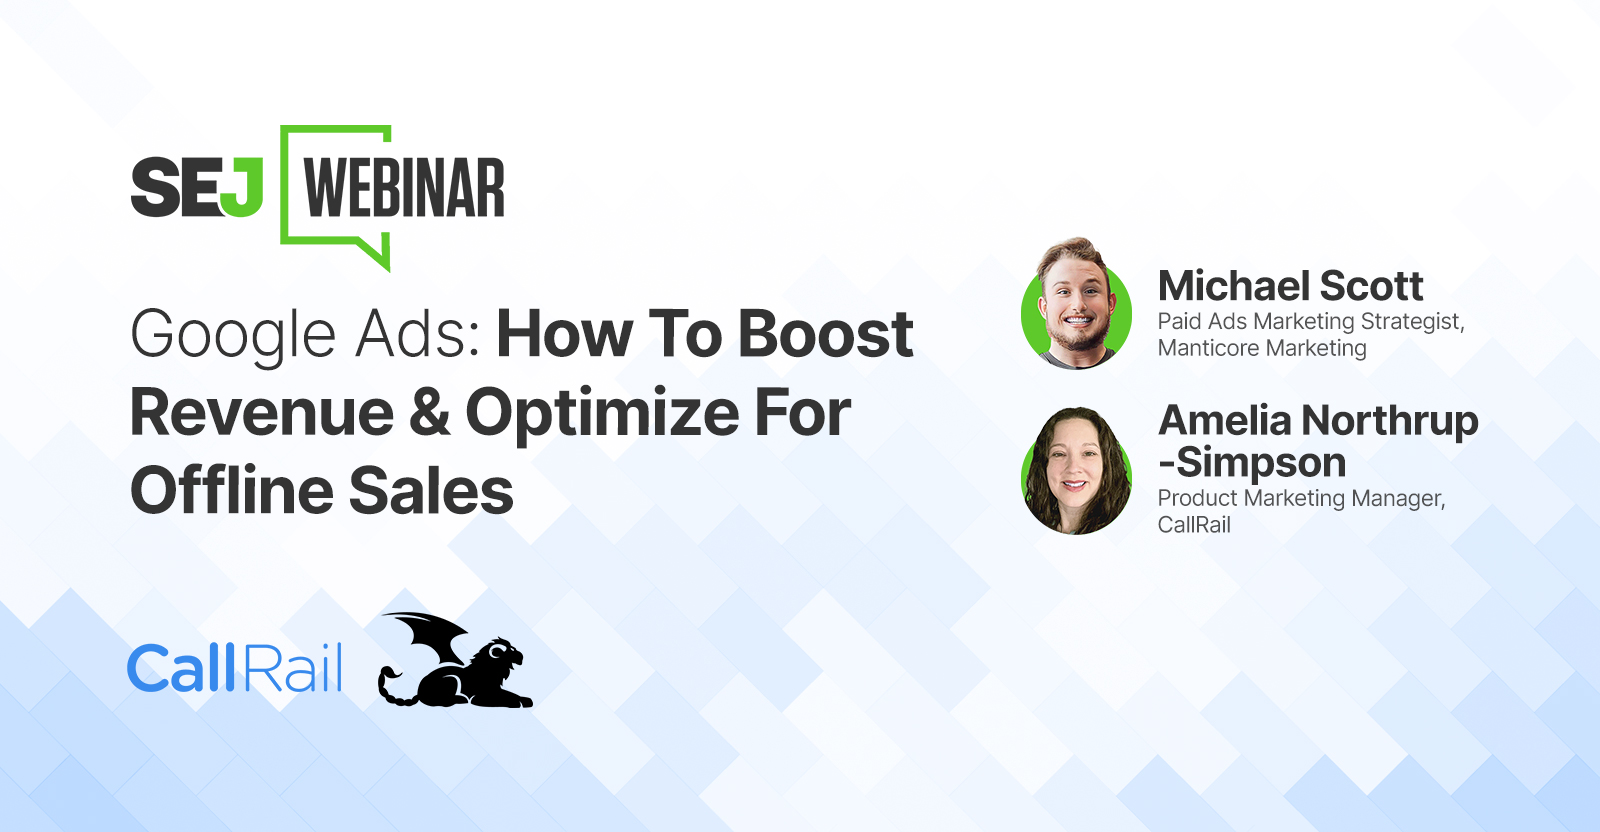 How To Start Optimizing Your Offline Conversions With Google Ads [Webinar]